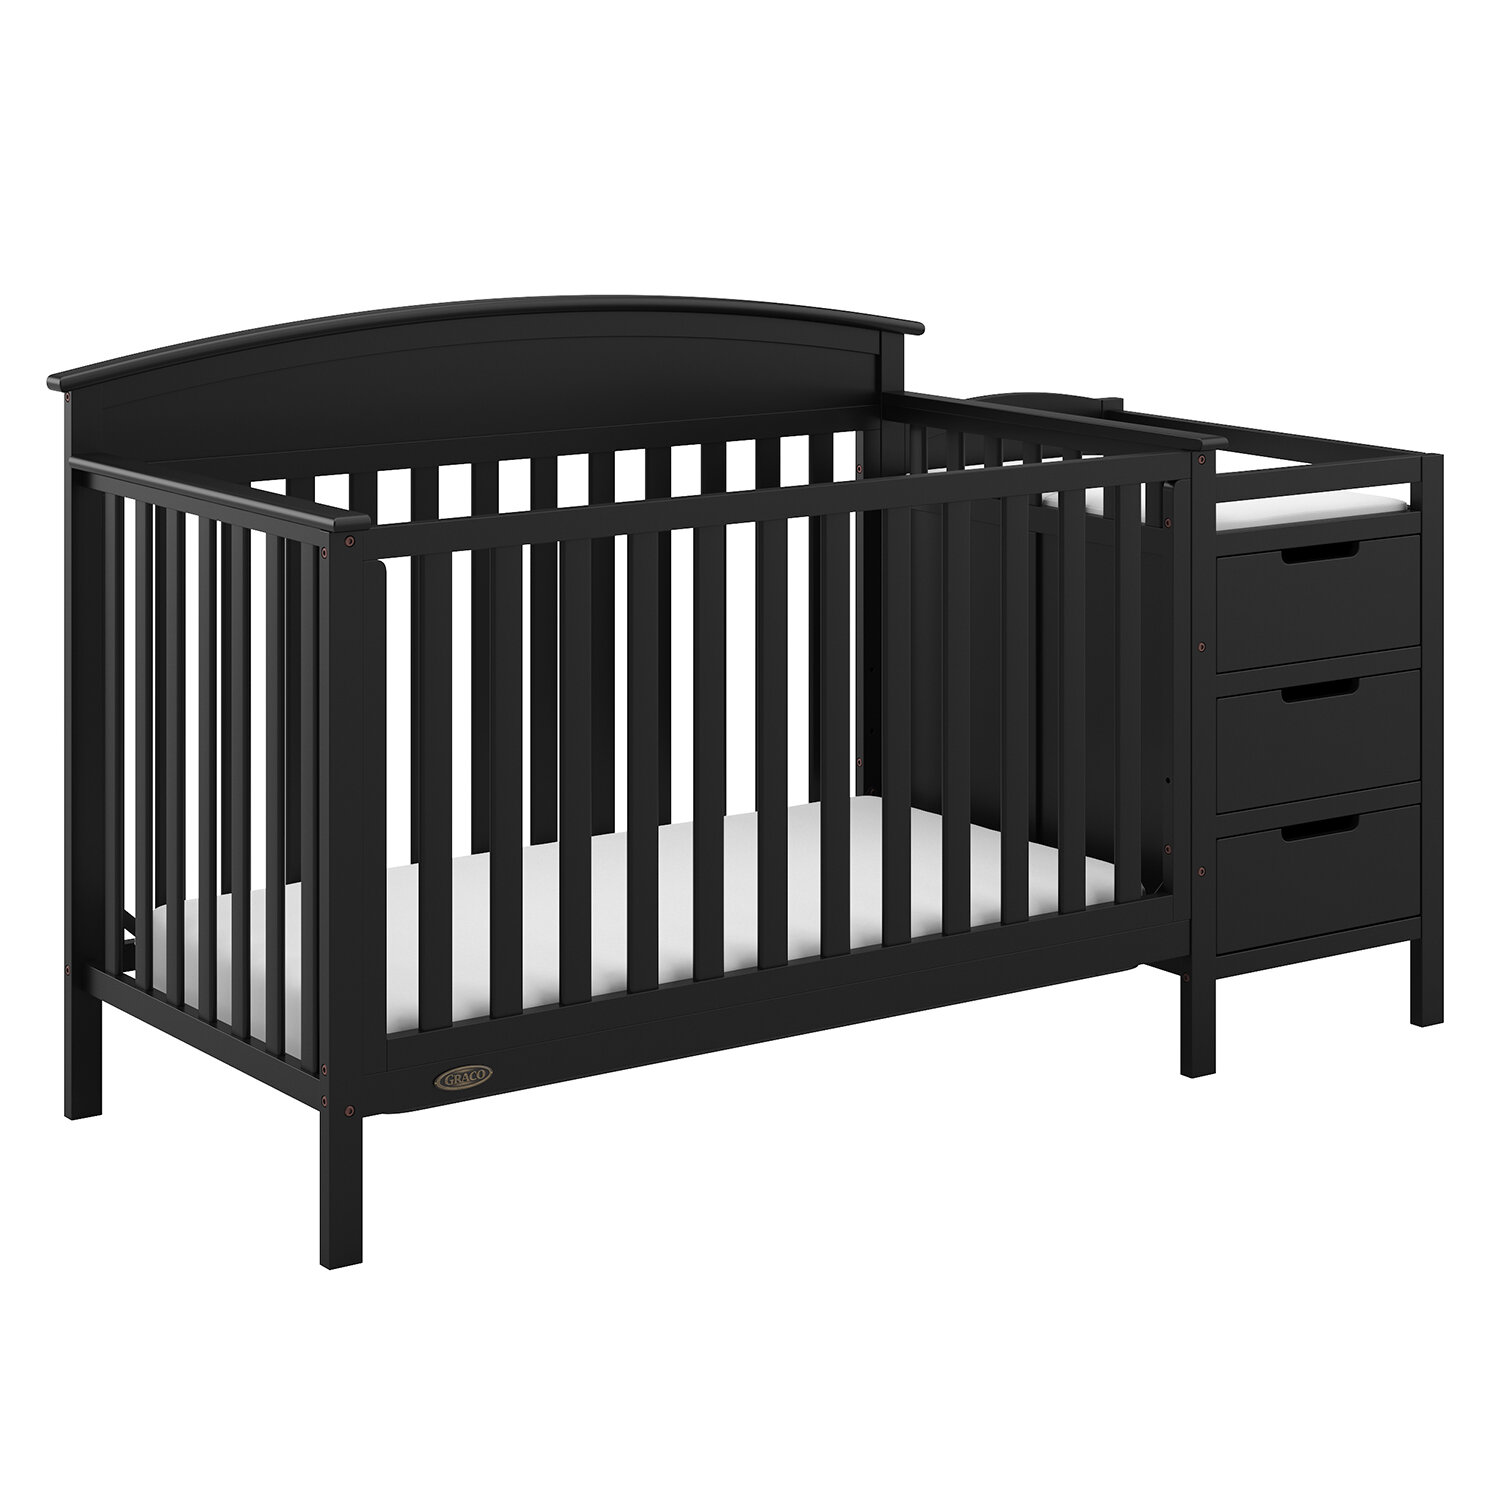 Solid Pine and Wood Product Construction Graco Stork Craft Graco Benton 4-in-1 Convertible Crib Grey Mattress Not Included Converts to Toddler Bed or Day Bed Gray 